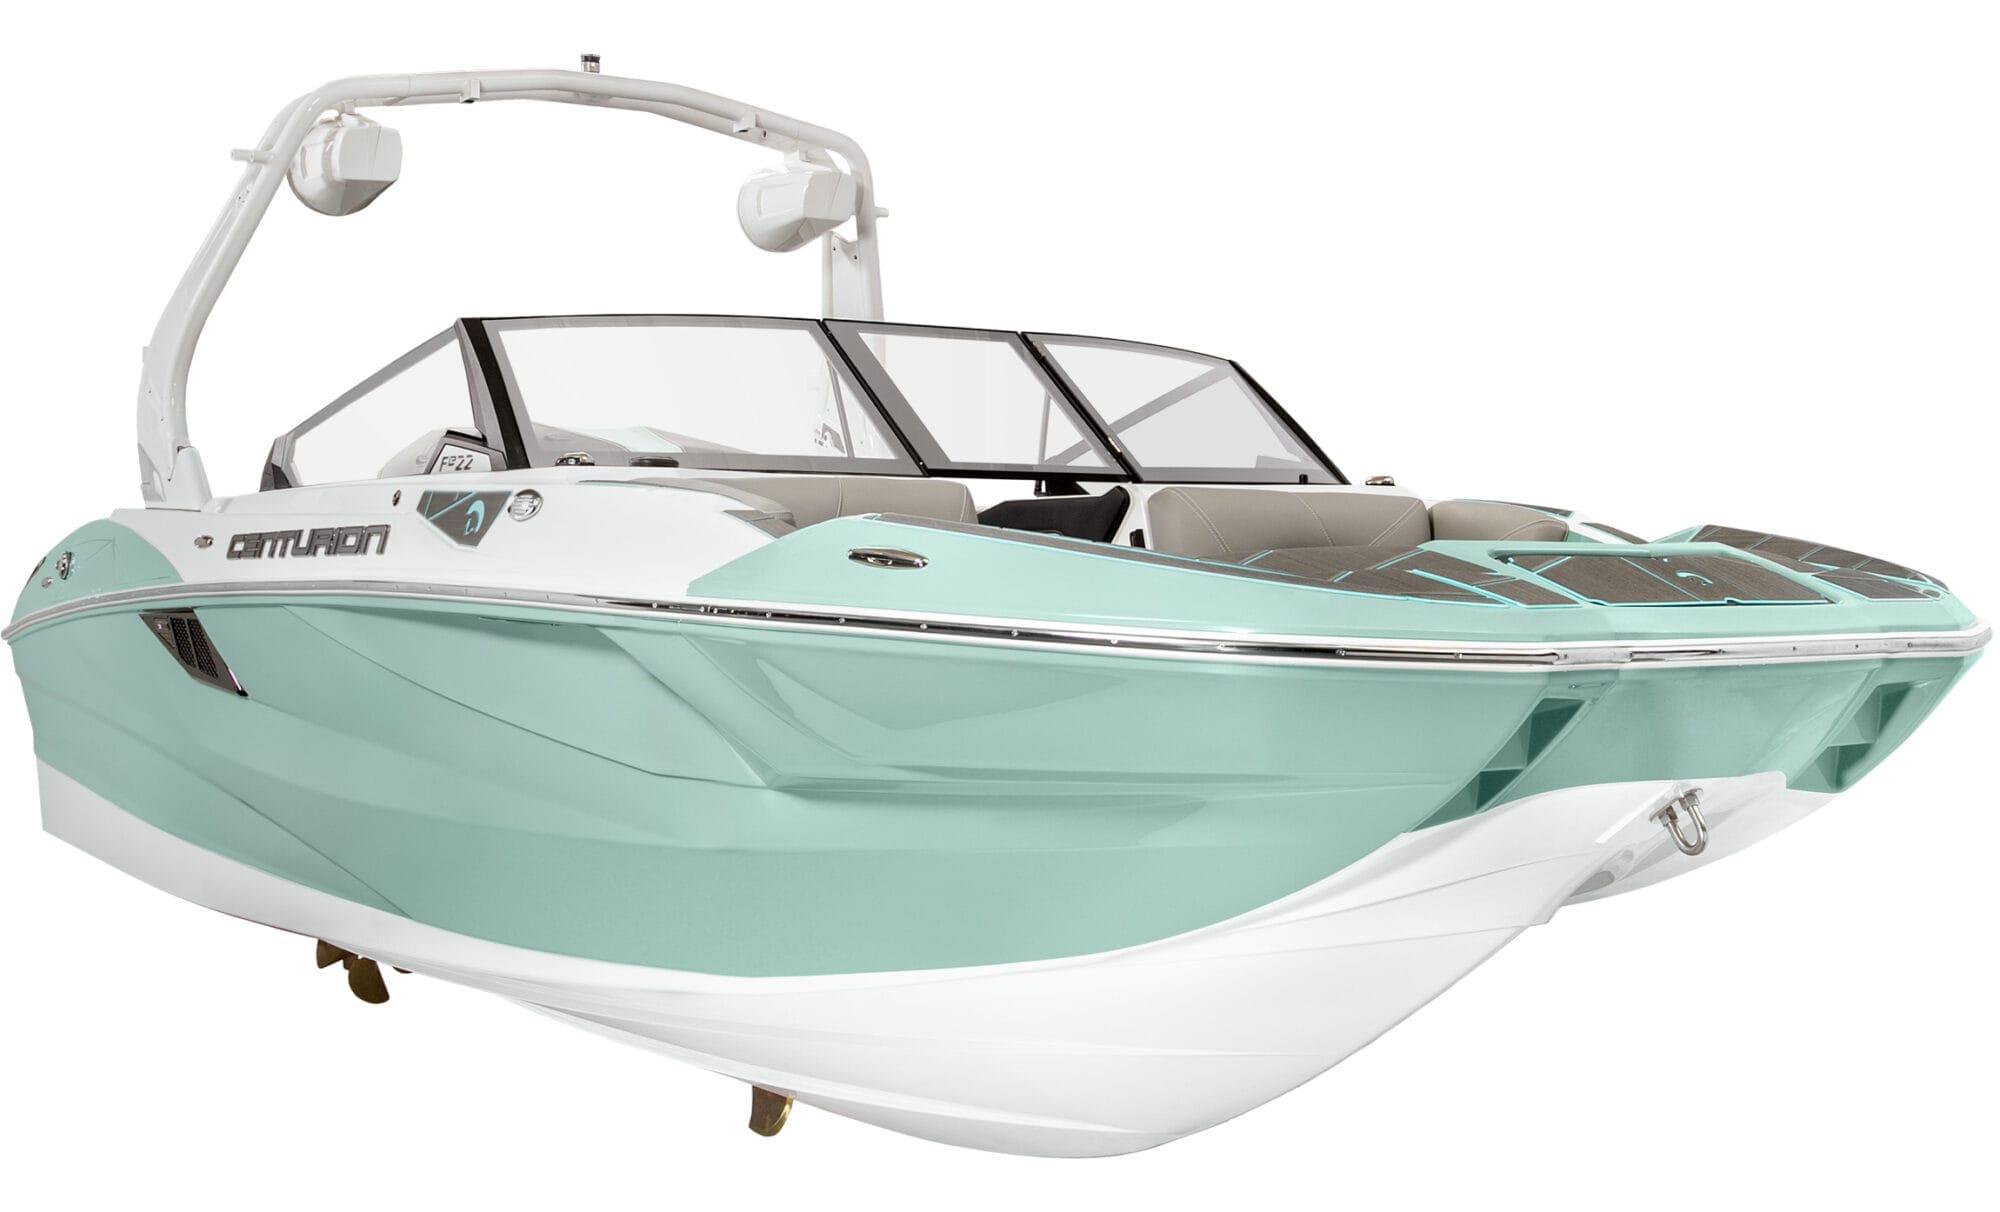 The Centurion Fe22 is a boat with a blue and white color scheme.